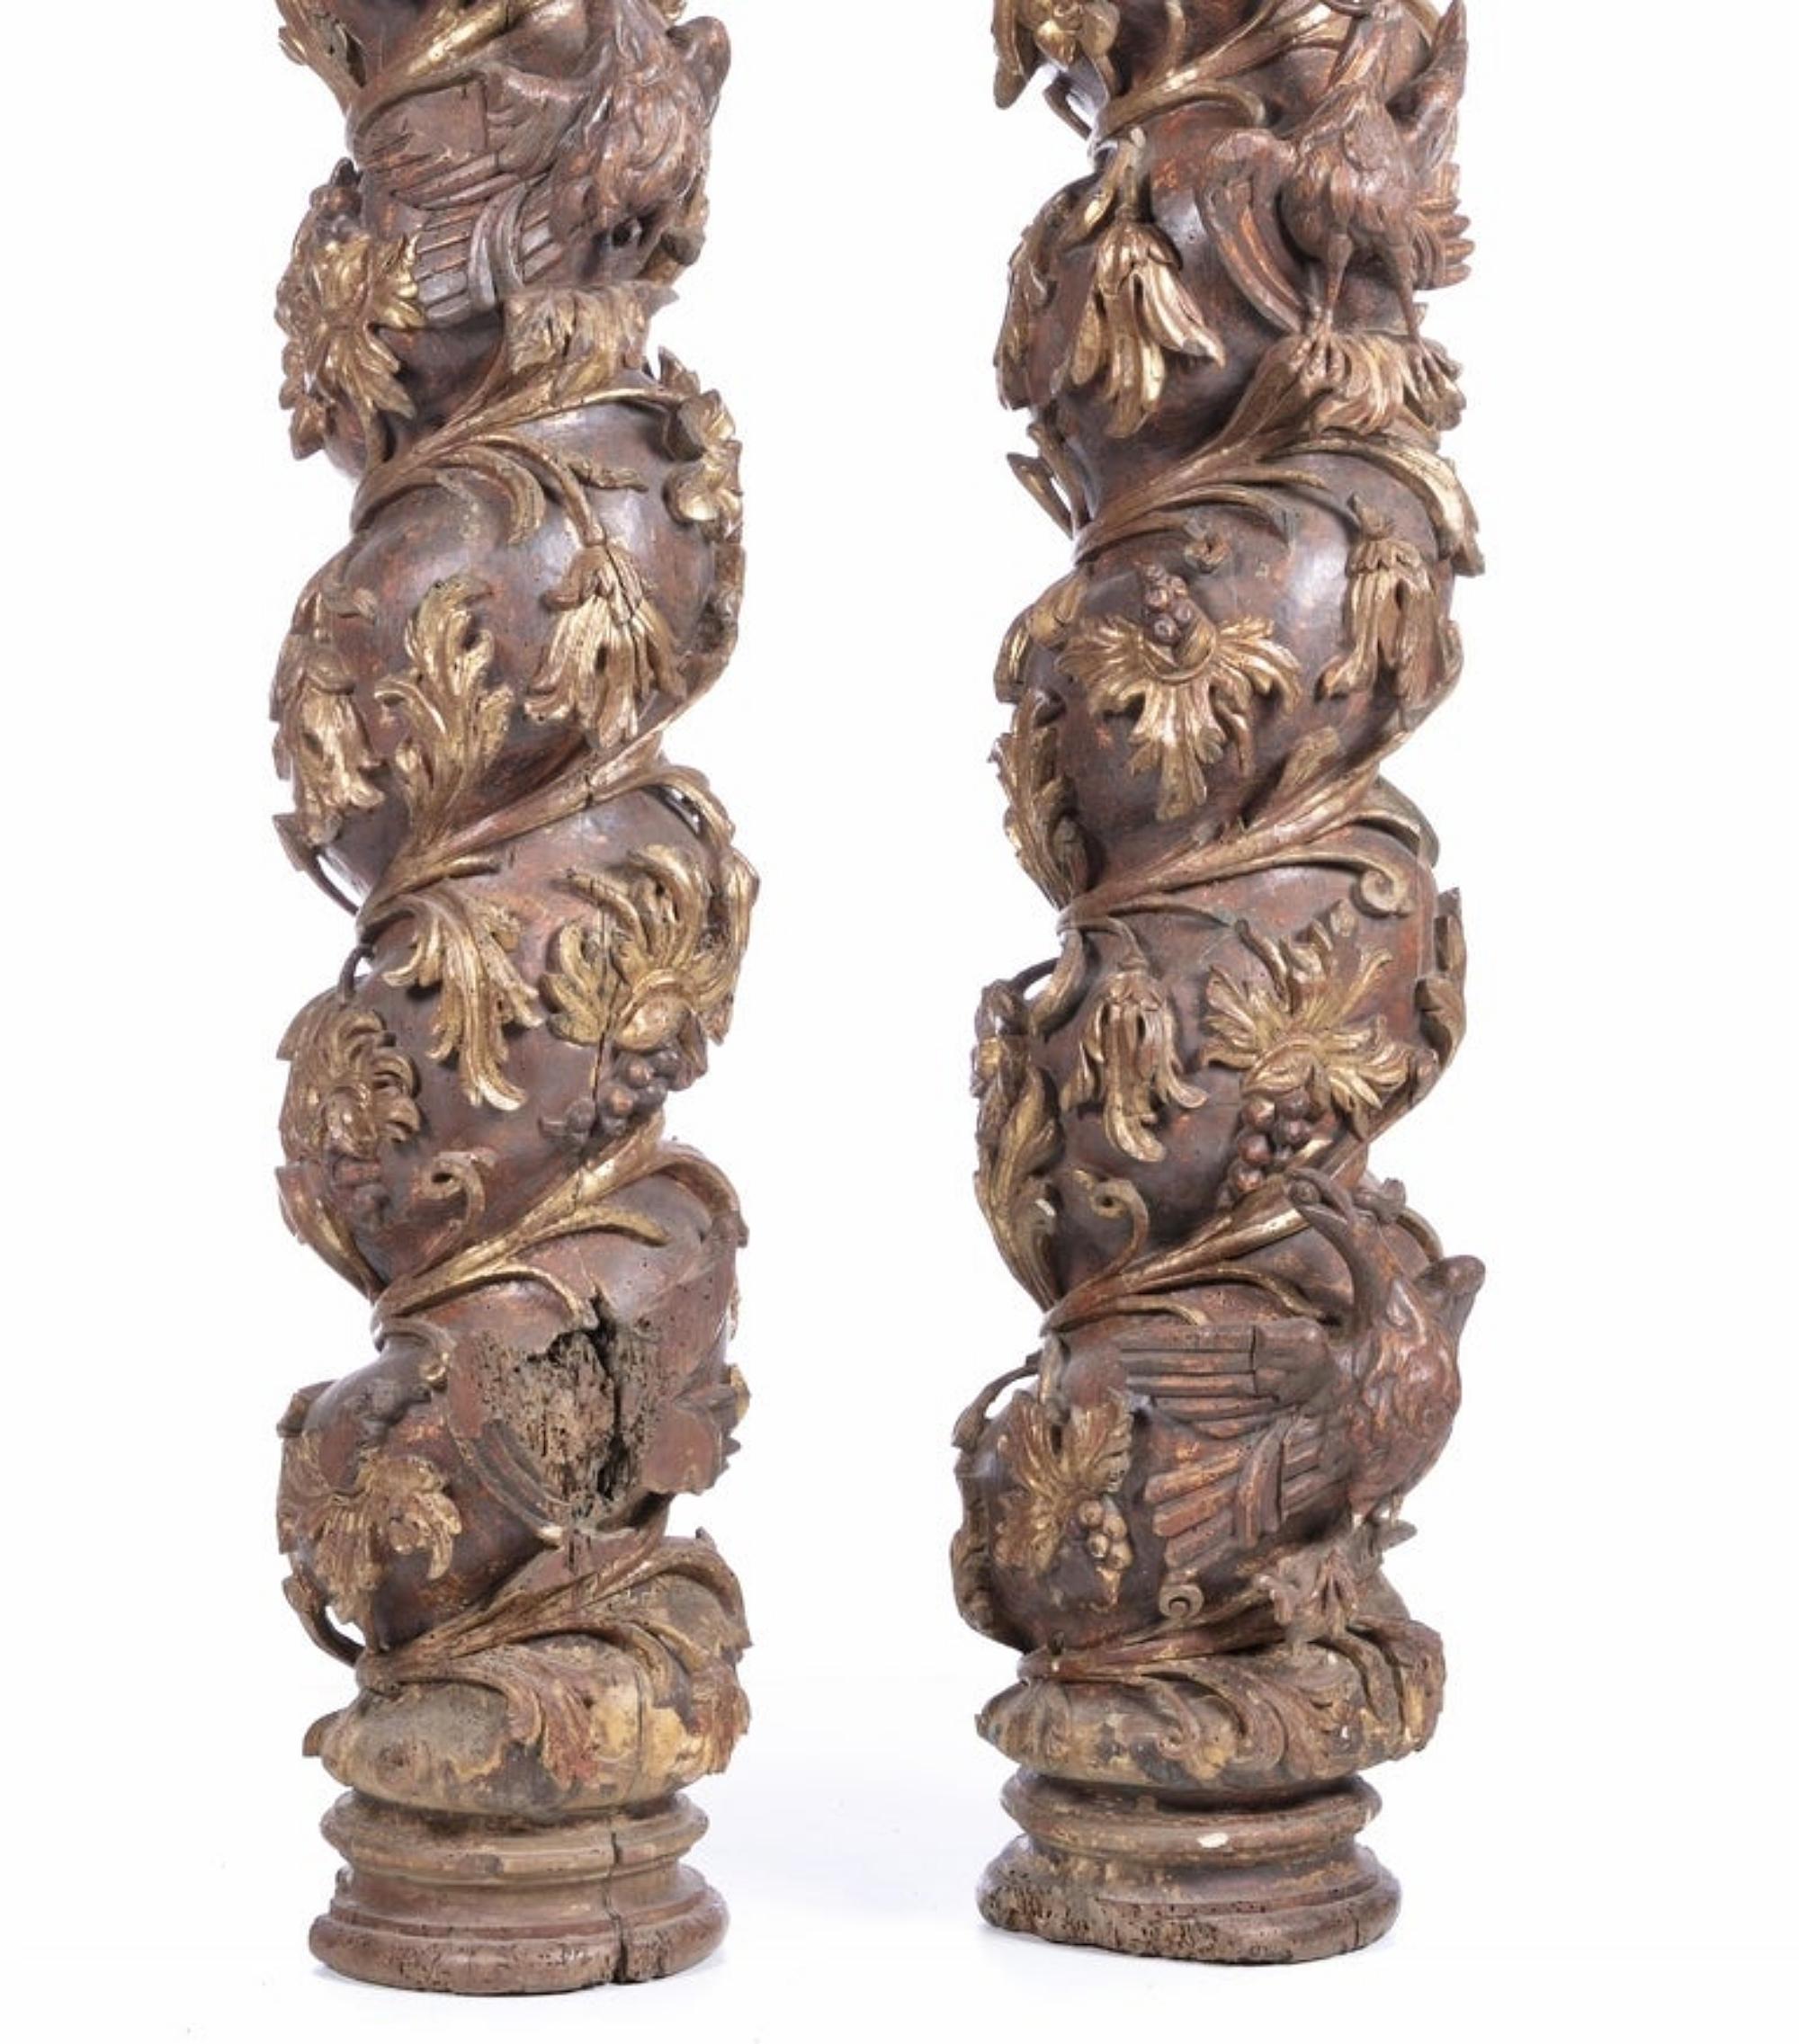 Pair of Spanish spiral columns
of the 17th century
in carved and gilded wood, decorated with plant elements, vines, bunches of grapes and birds.
Small flaws in polychrome
Dimension. Height: 220 cm.